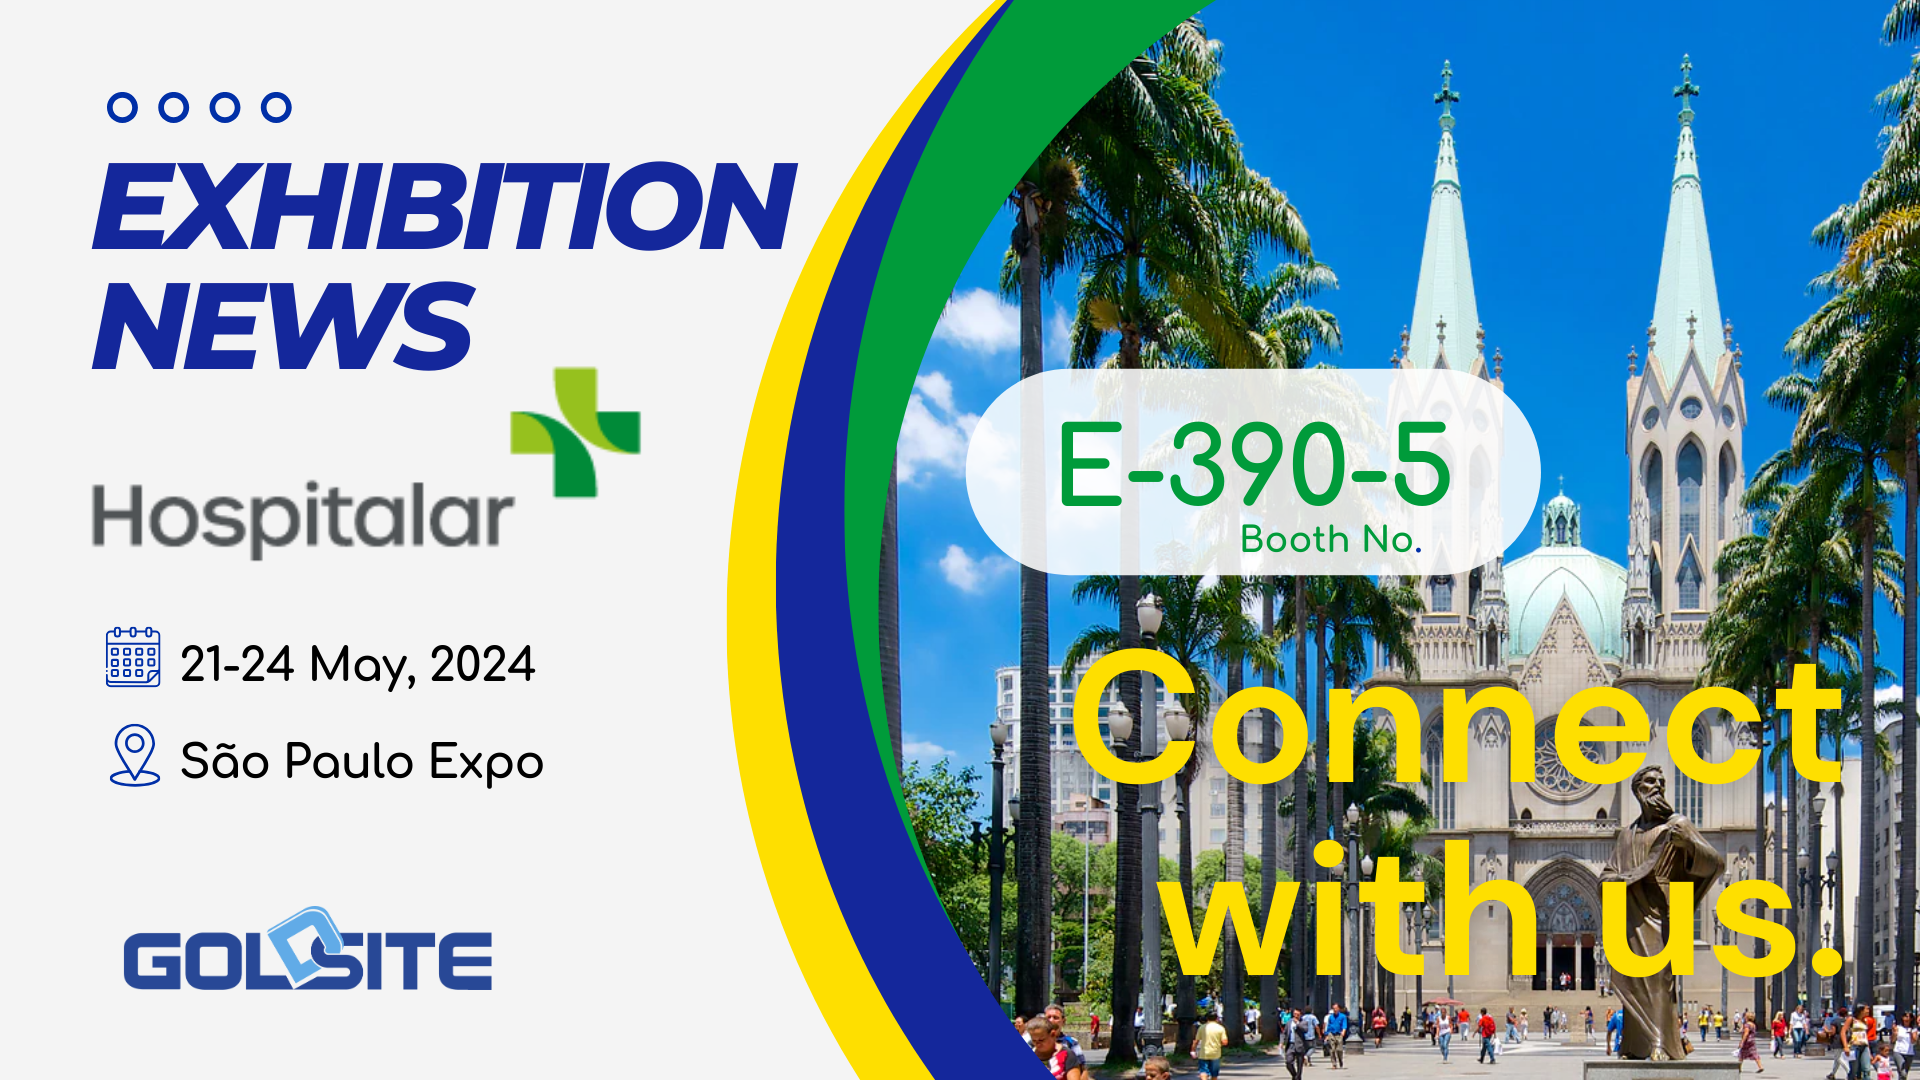 Upcoming Events: Goldsite To Exhibit at Hospitalar 2024 in Brazil